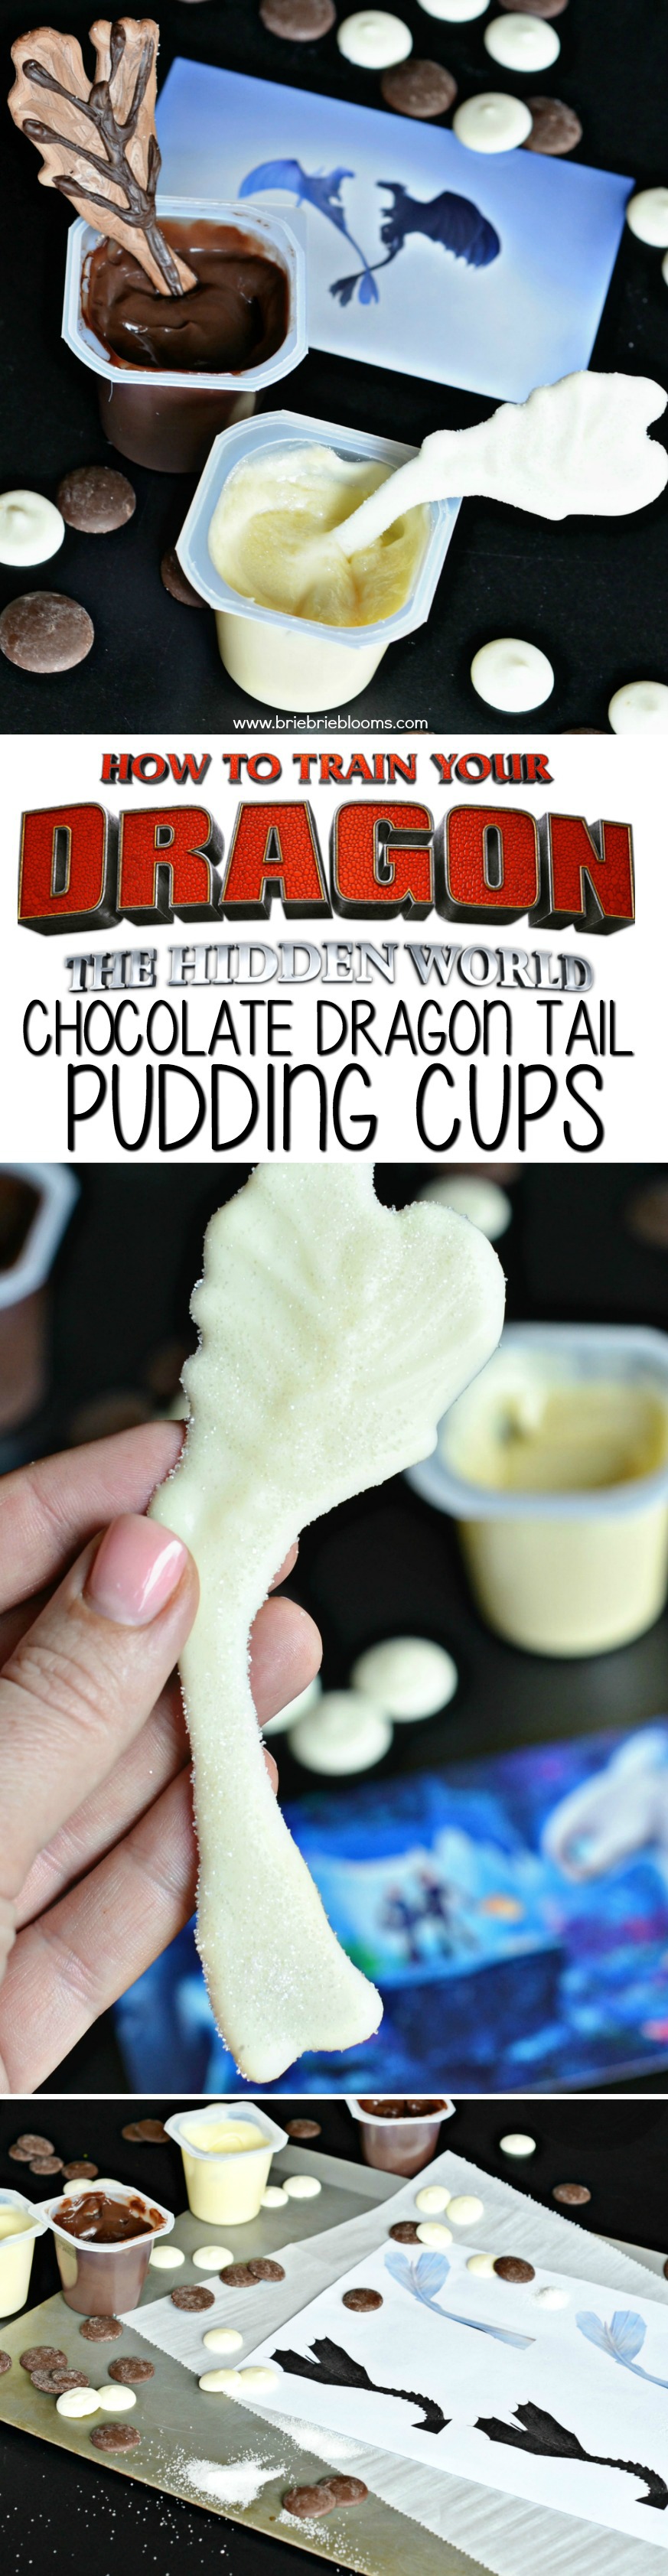 Make these fun How to Train Your Dragon chocolate dragon tail pudding cups for a movie night in!